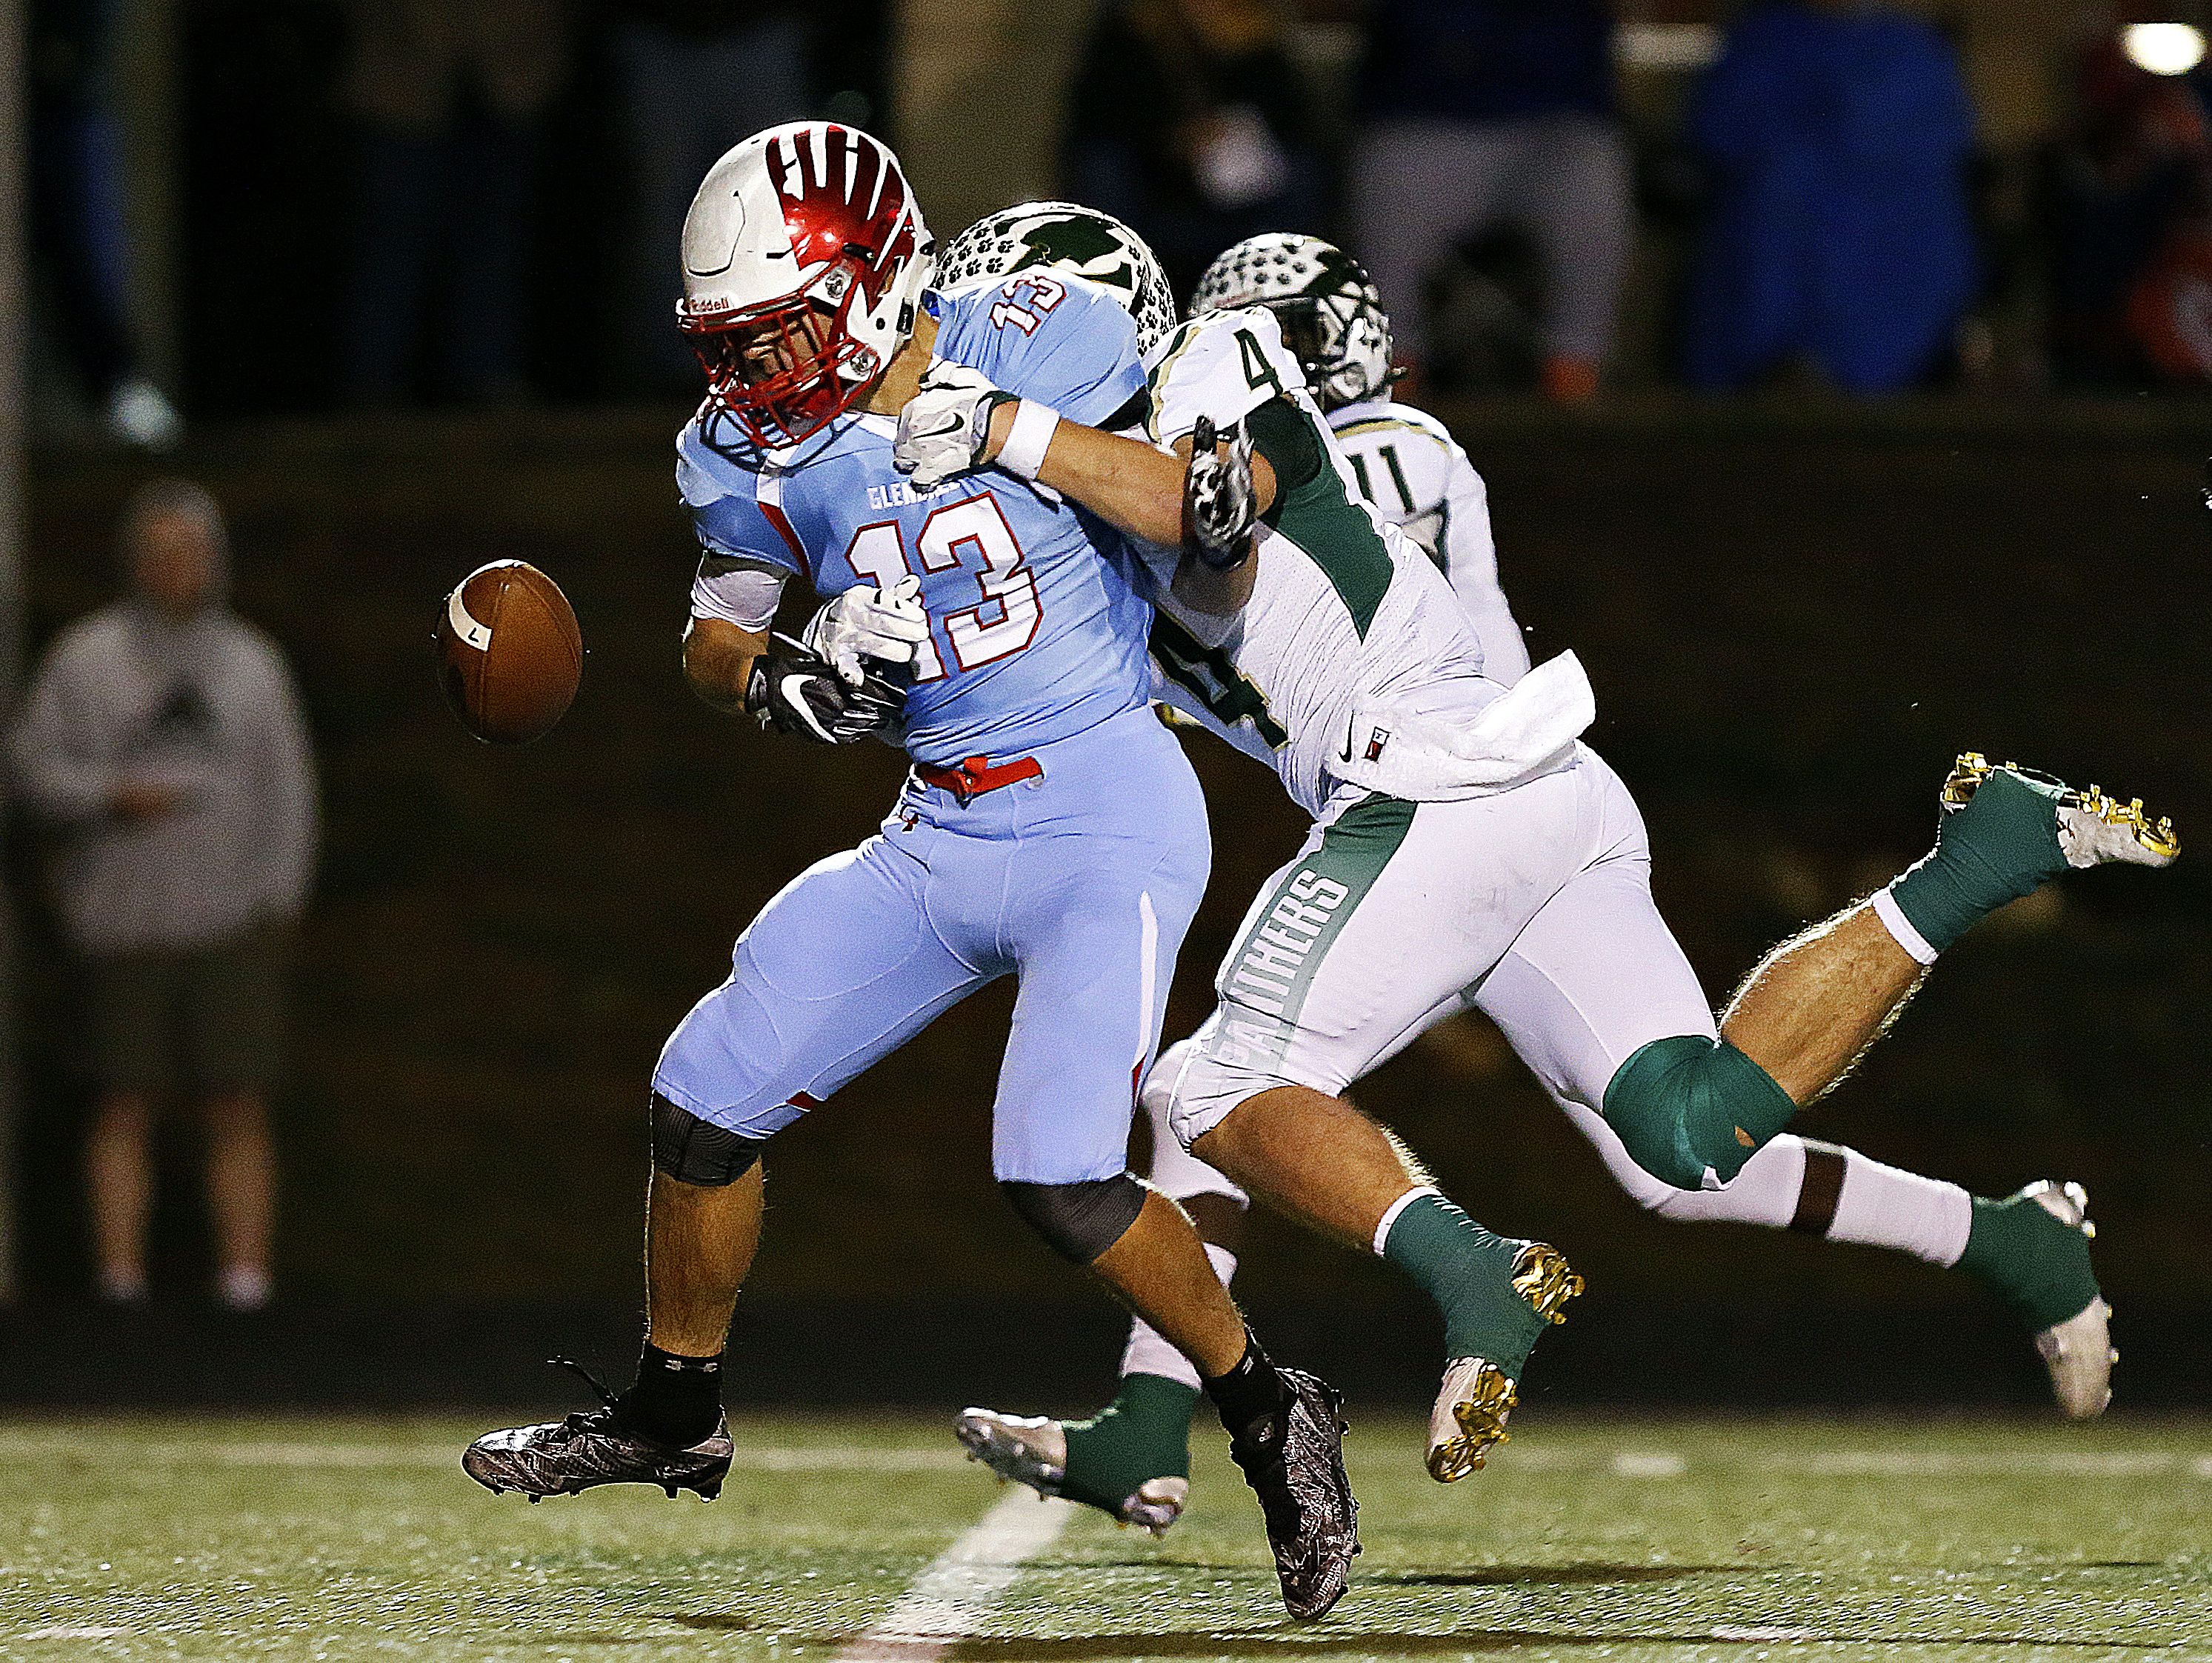 Glendale High School wide receiver Max Nichols (13) fumbles the ball after a tackle by Panthers defensive back Cade Brister (4) during first quarter action of the playoff game between Glendale High School and Ft. Zumwalt North High School held at Lowe Stadium in Springfield, Mo. on Nov. 11, 2016.